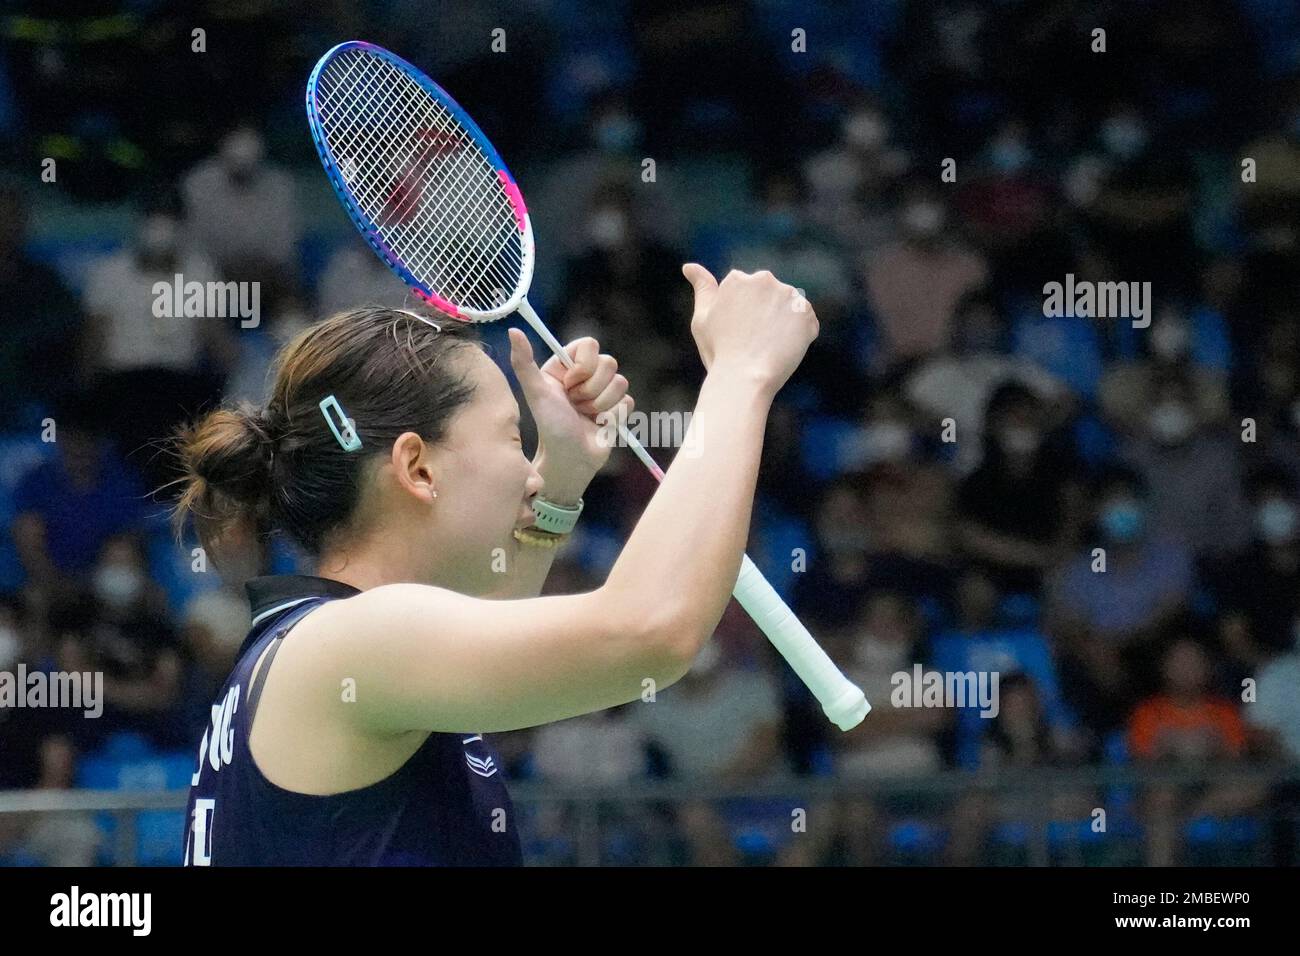 Pornpawe Chochuwong of Thailand celebrate after defeat Putri Kusuma Wardani of Indonesia during their womens singles team final badminton match at the 31st Southeast Asian Games (SEA Games 31) in Bad Giang